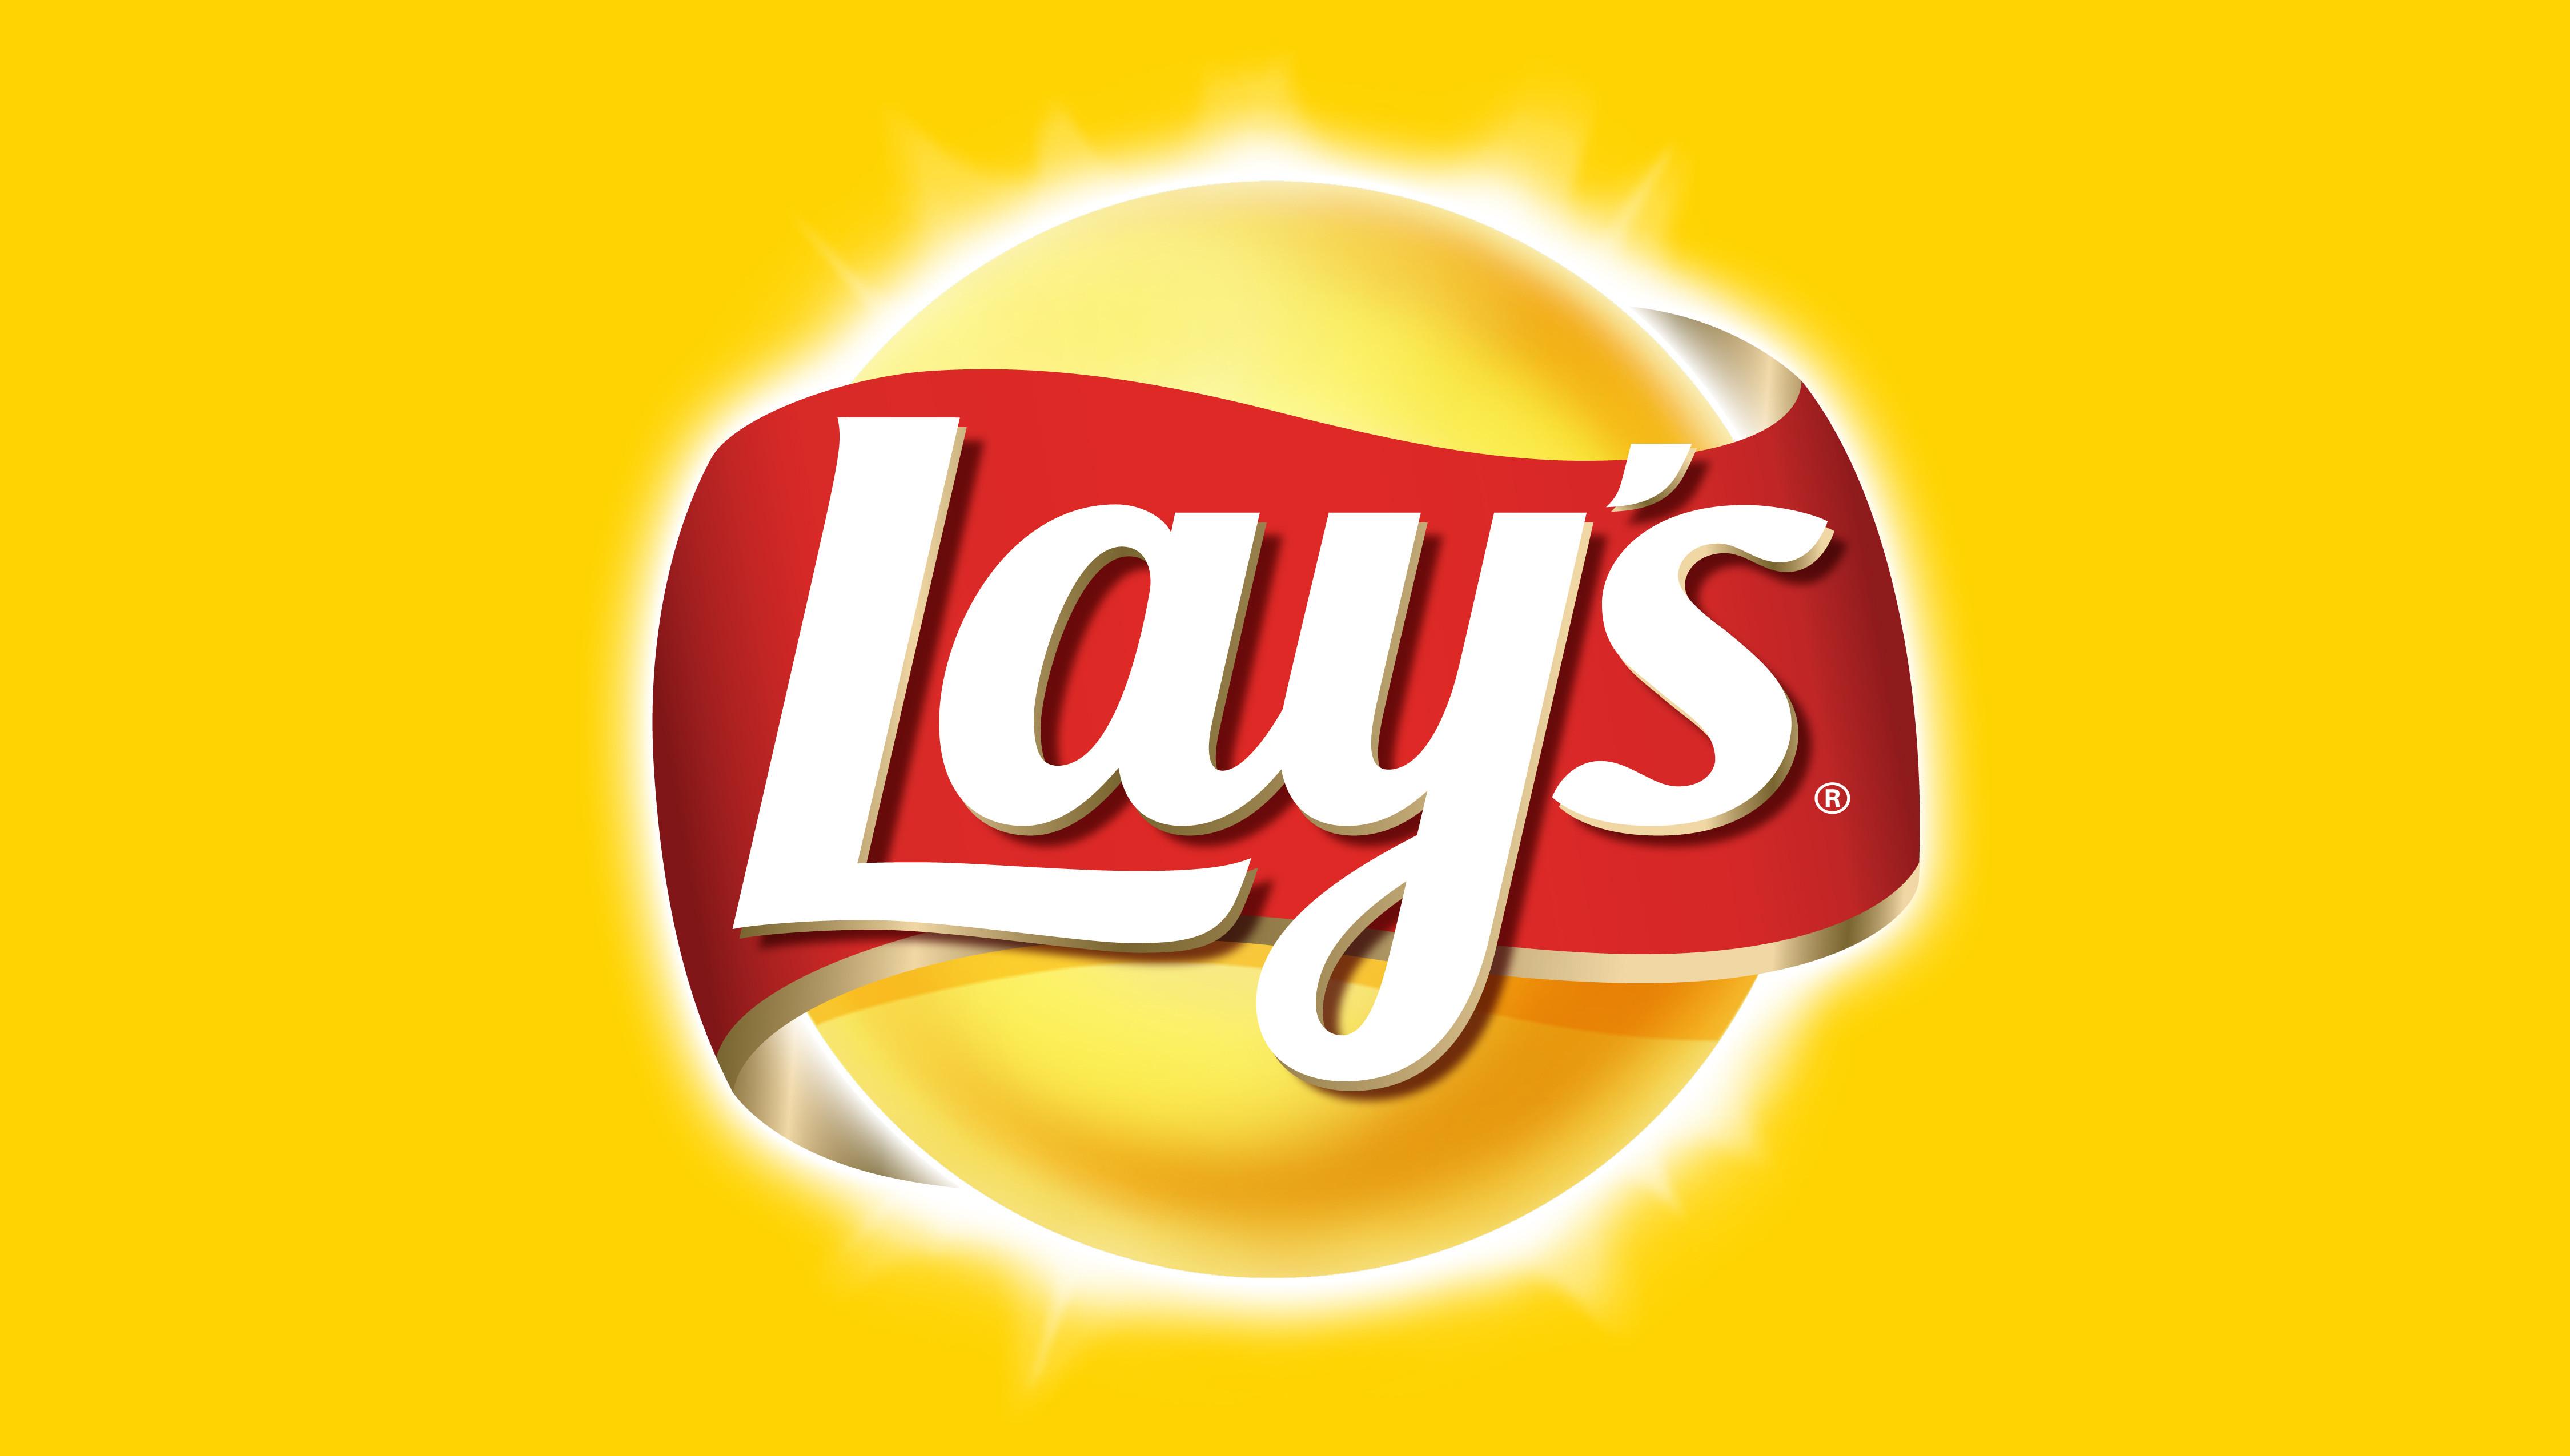 Yellow and Red Chips Logo - Lays | Lays Product Packaging | Perspective Branding